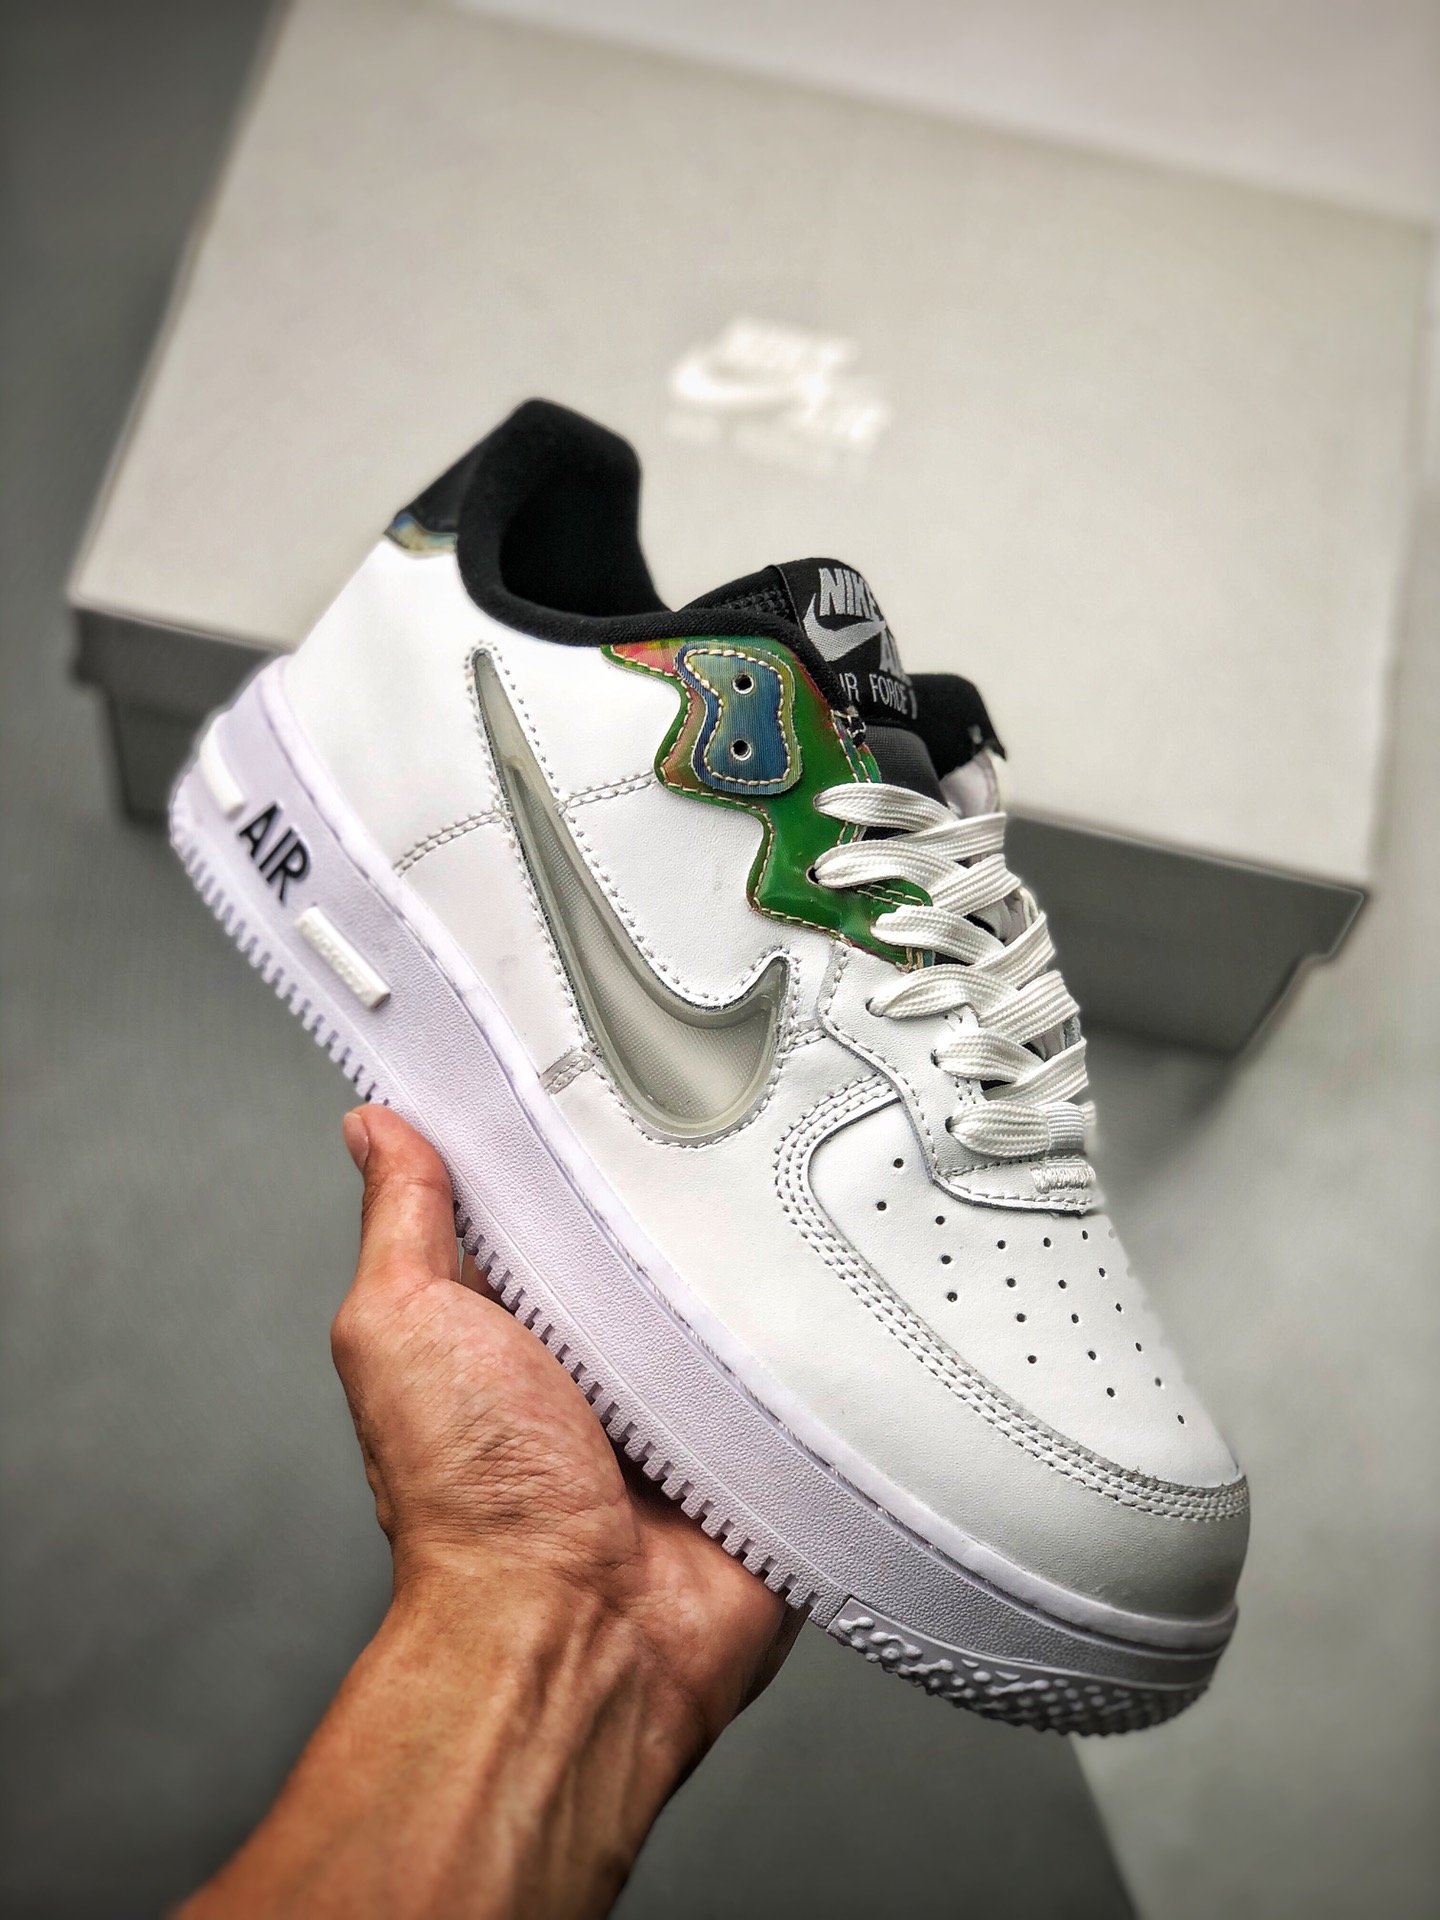 Nike Air AF Force 1 React White/Glow-Black-Multi-Color Shoes